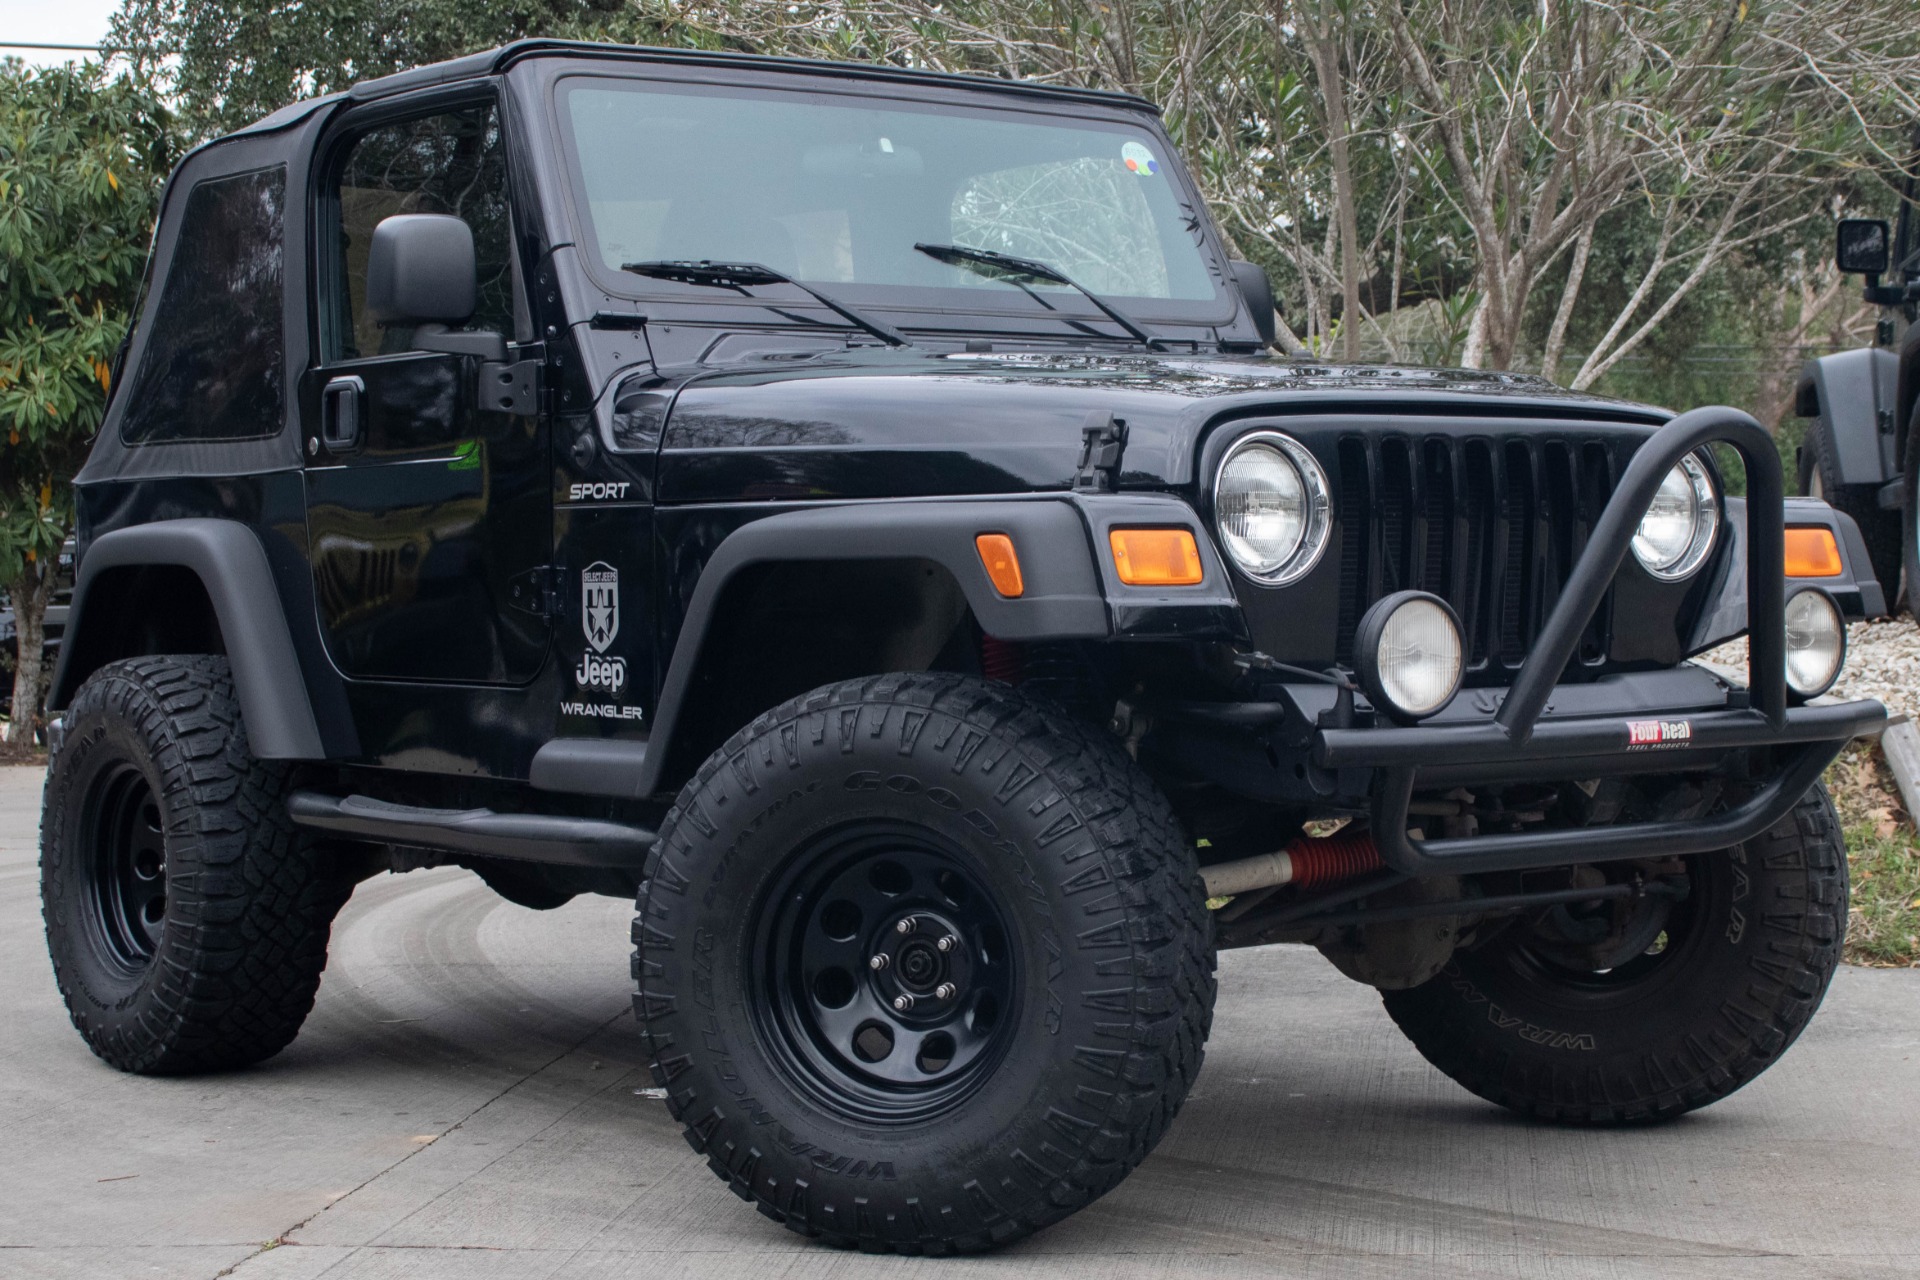 Used 2006 Jeep Wrangler Sport For Sale ($18,995) | Select Jeeps Inc. Stock  #748532